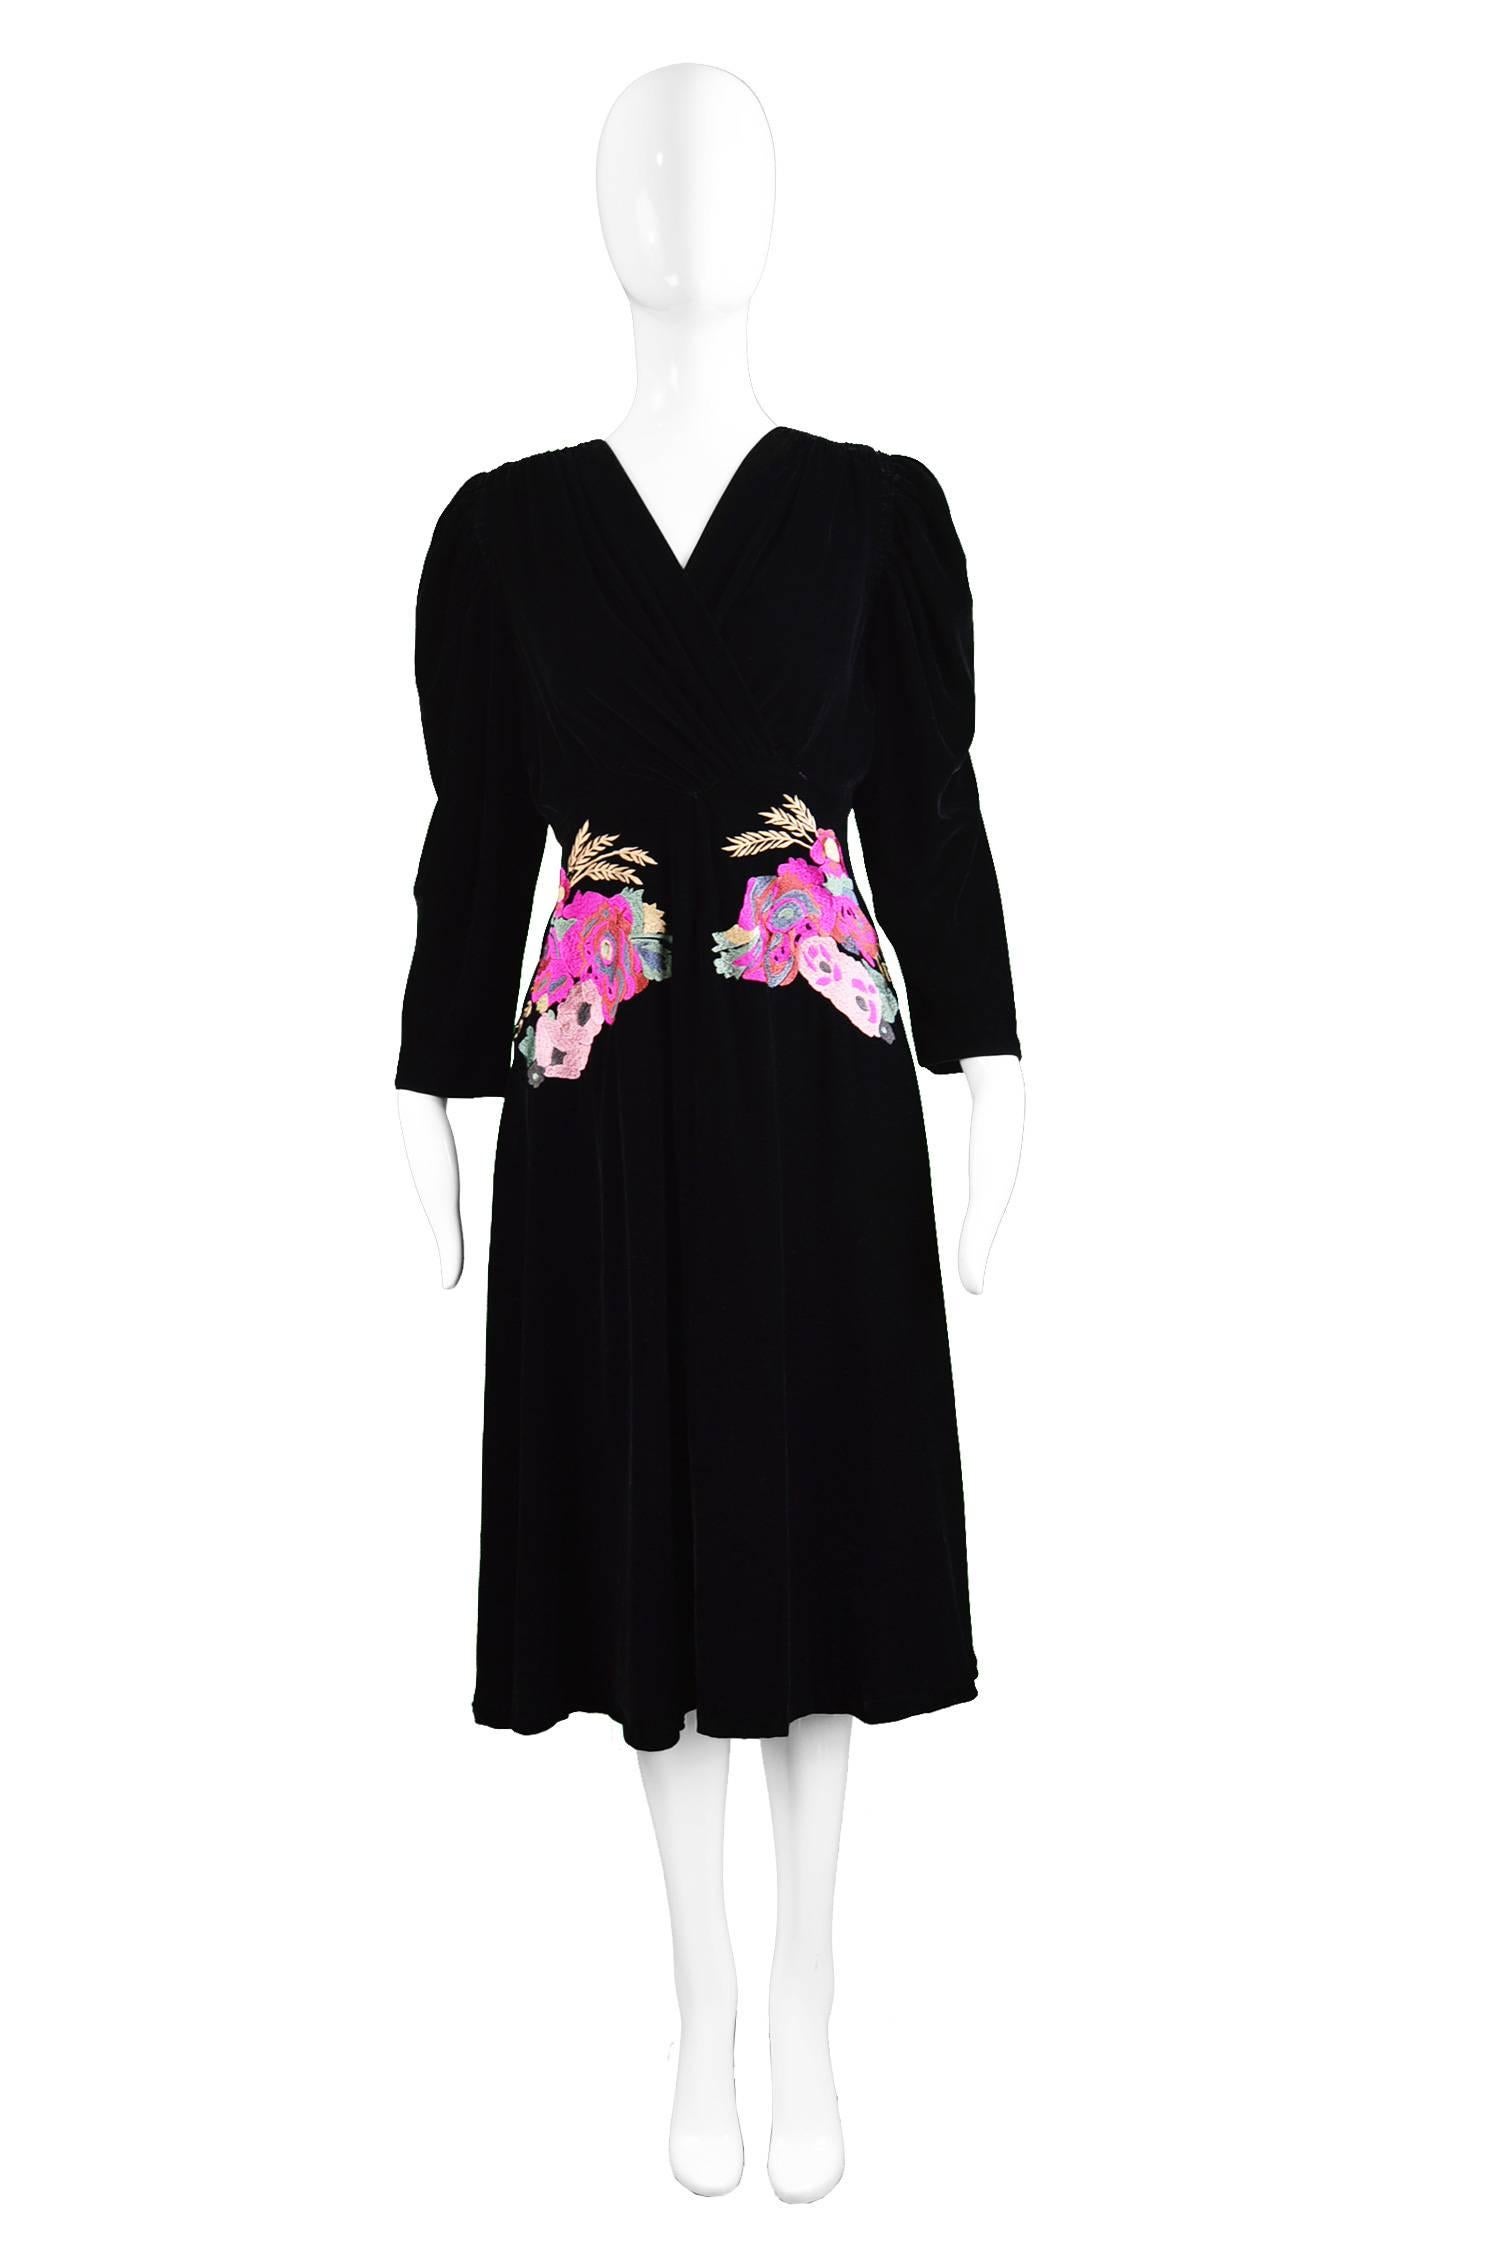 A stunning Kenzo evening dress in a luxurious black silk & rayon velvet. The shoulders have soft pleats at the front and on the sleeves which creates draping and a faux wrap style effect that flatters the bust. To the front of the dress are two